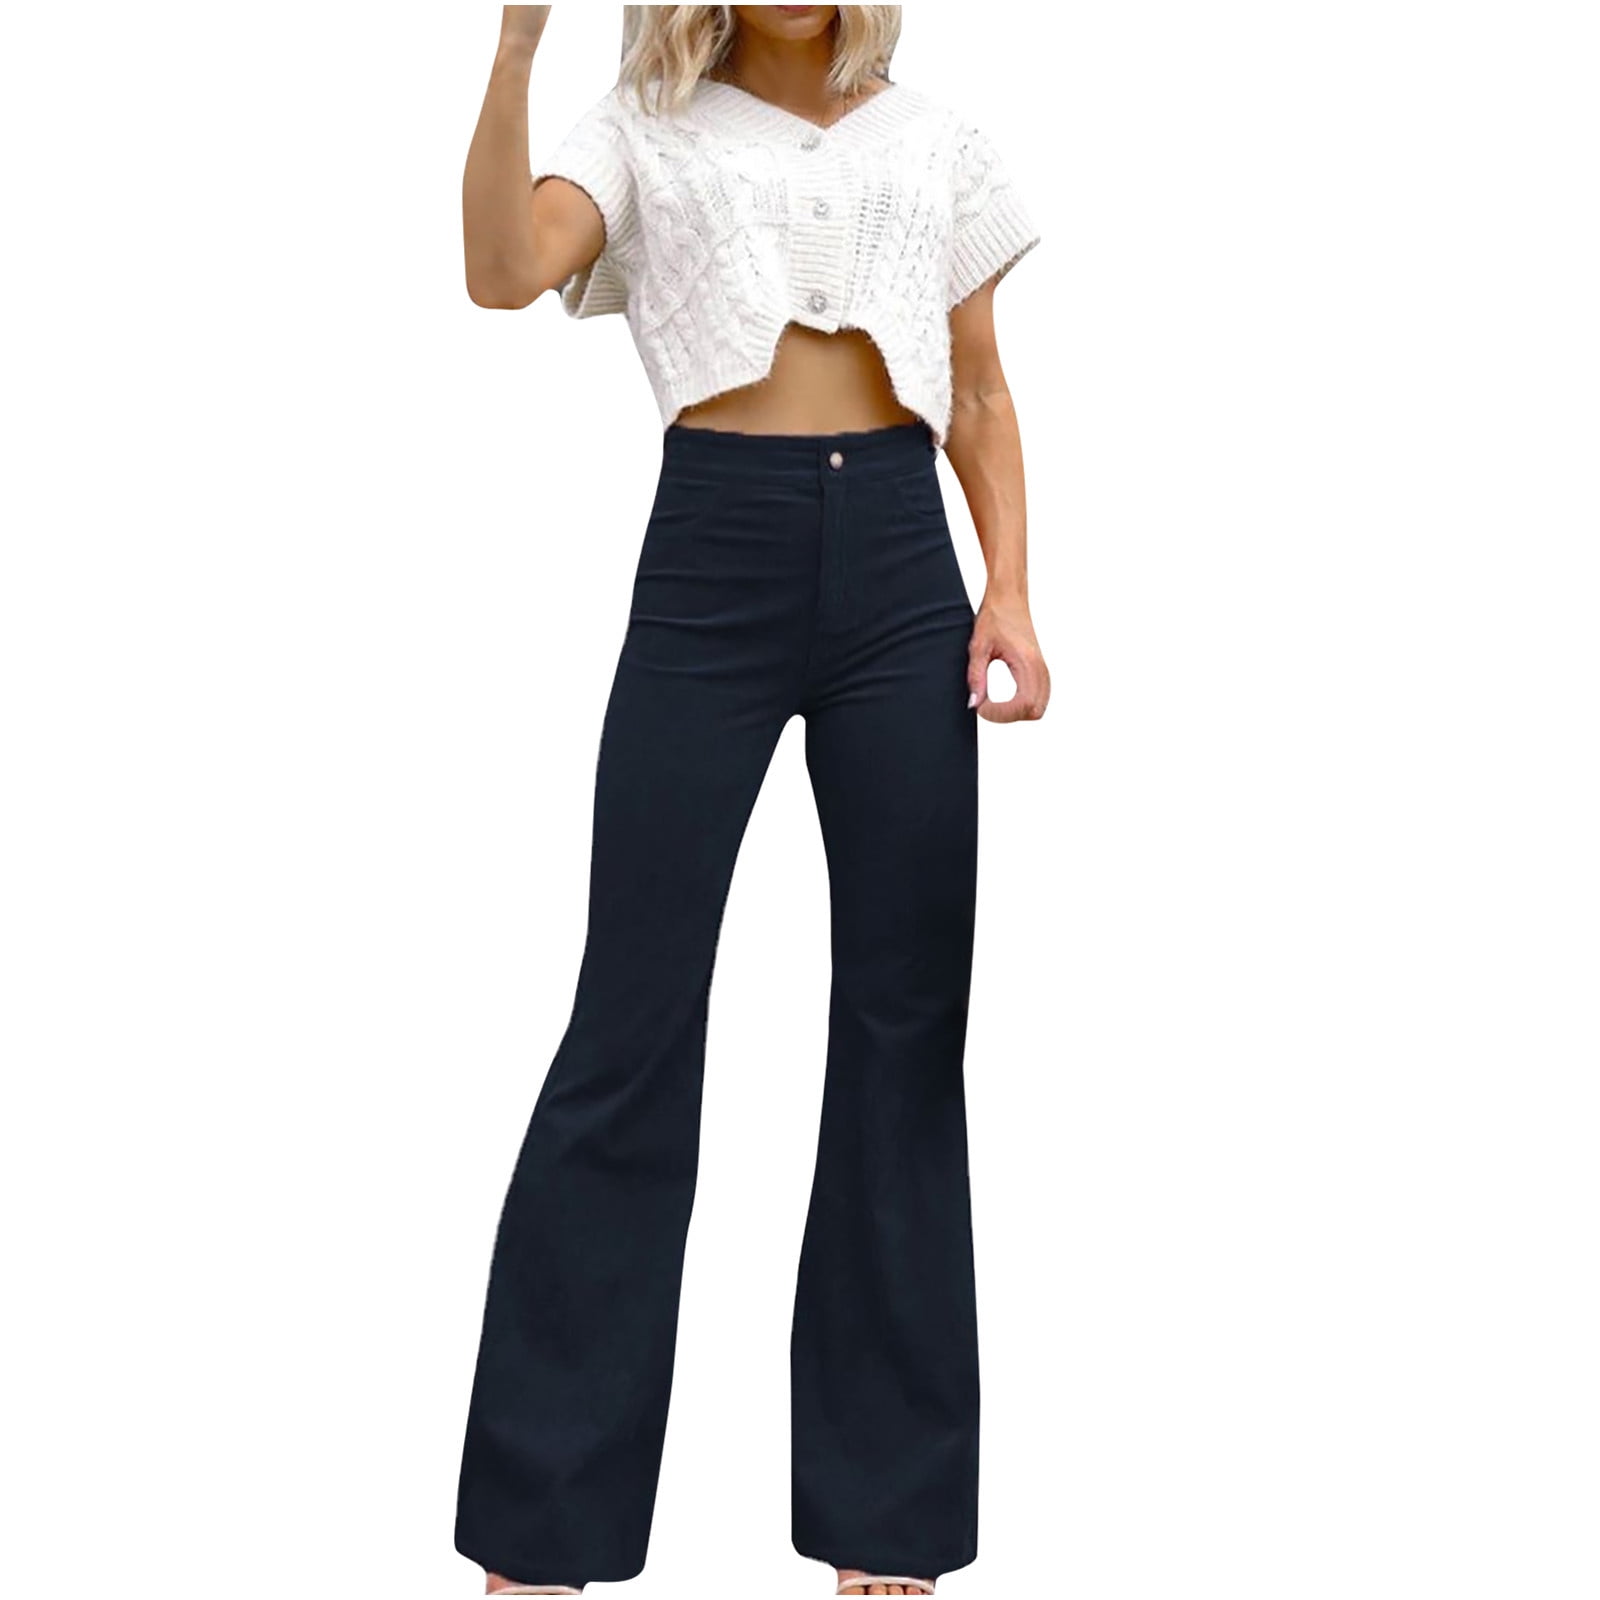 Cotton Plain Women New Fashion Bell Bottom Trousers, Size: 30.0 at